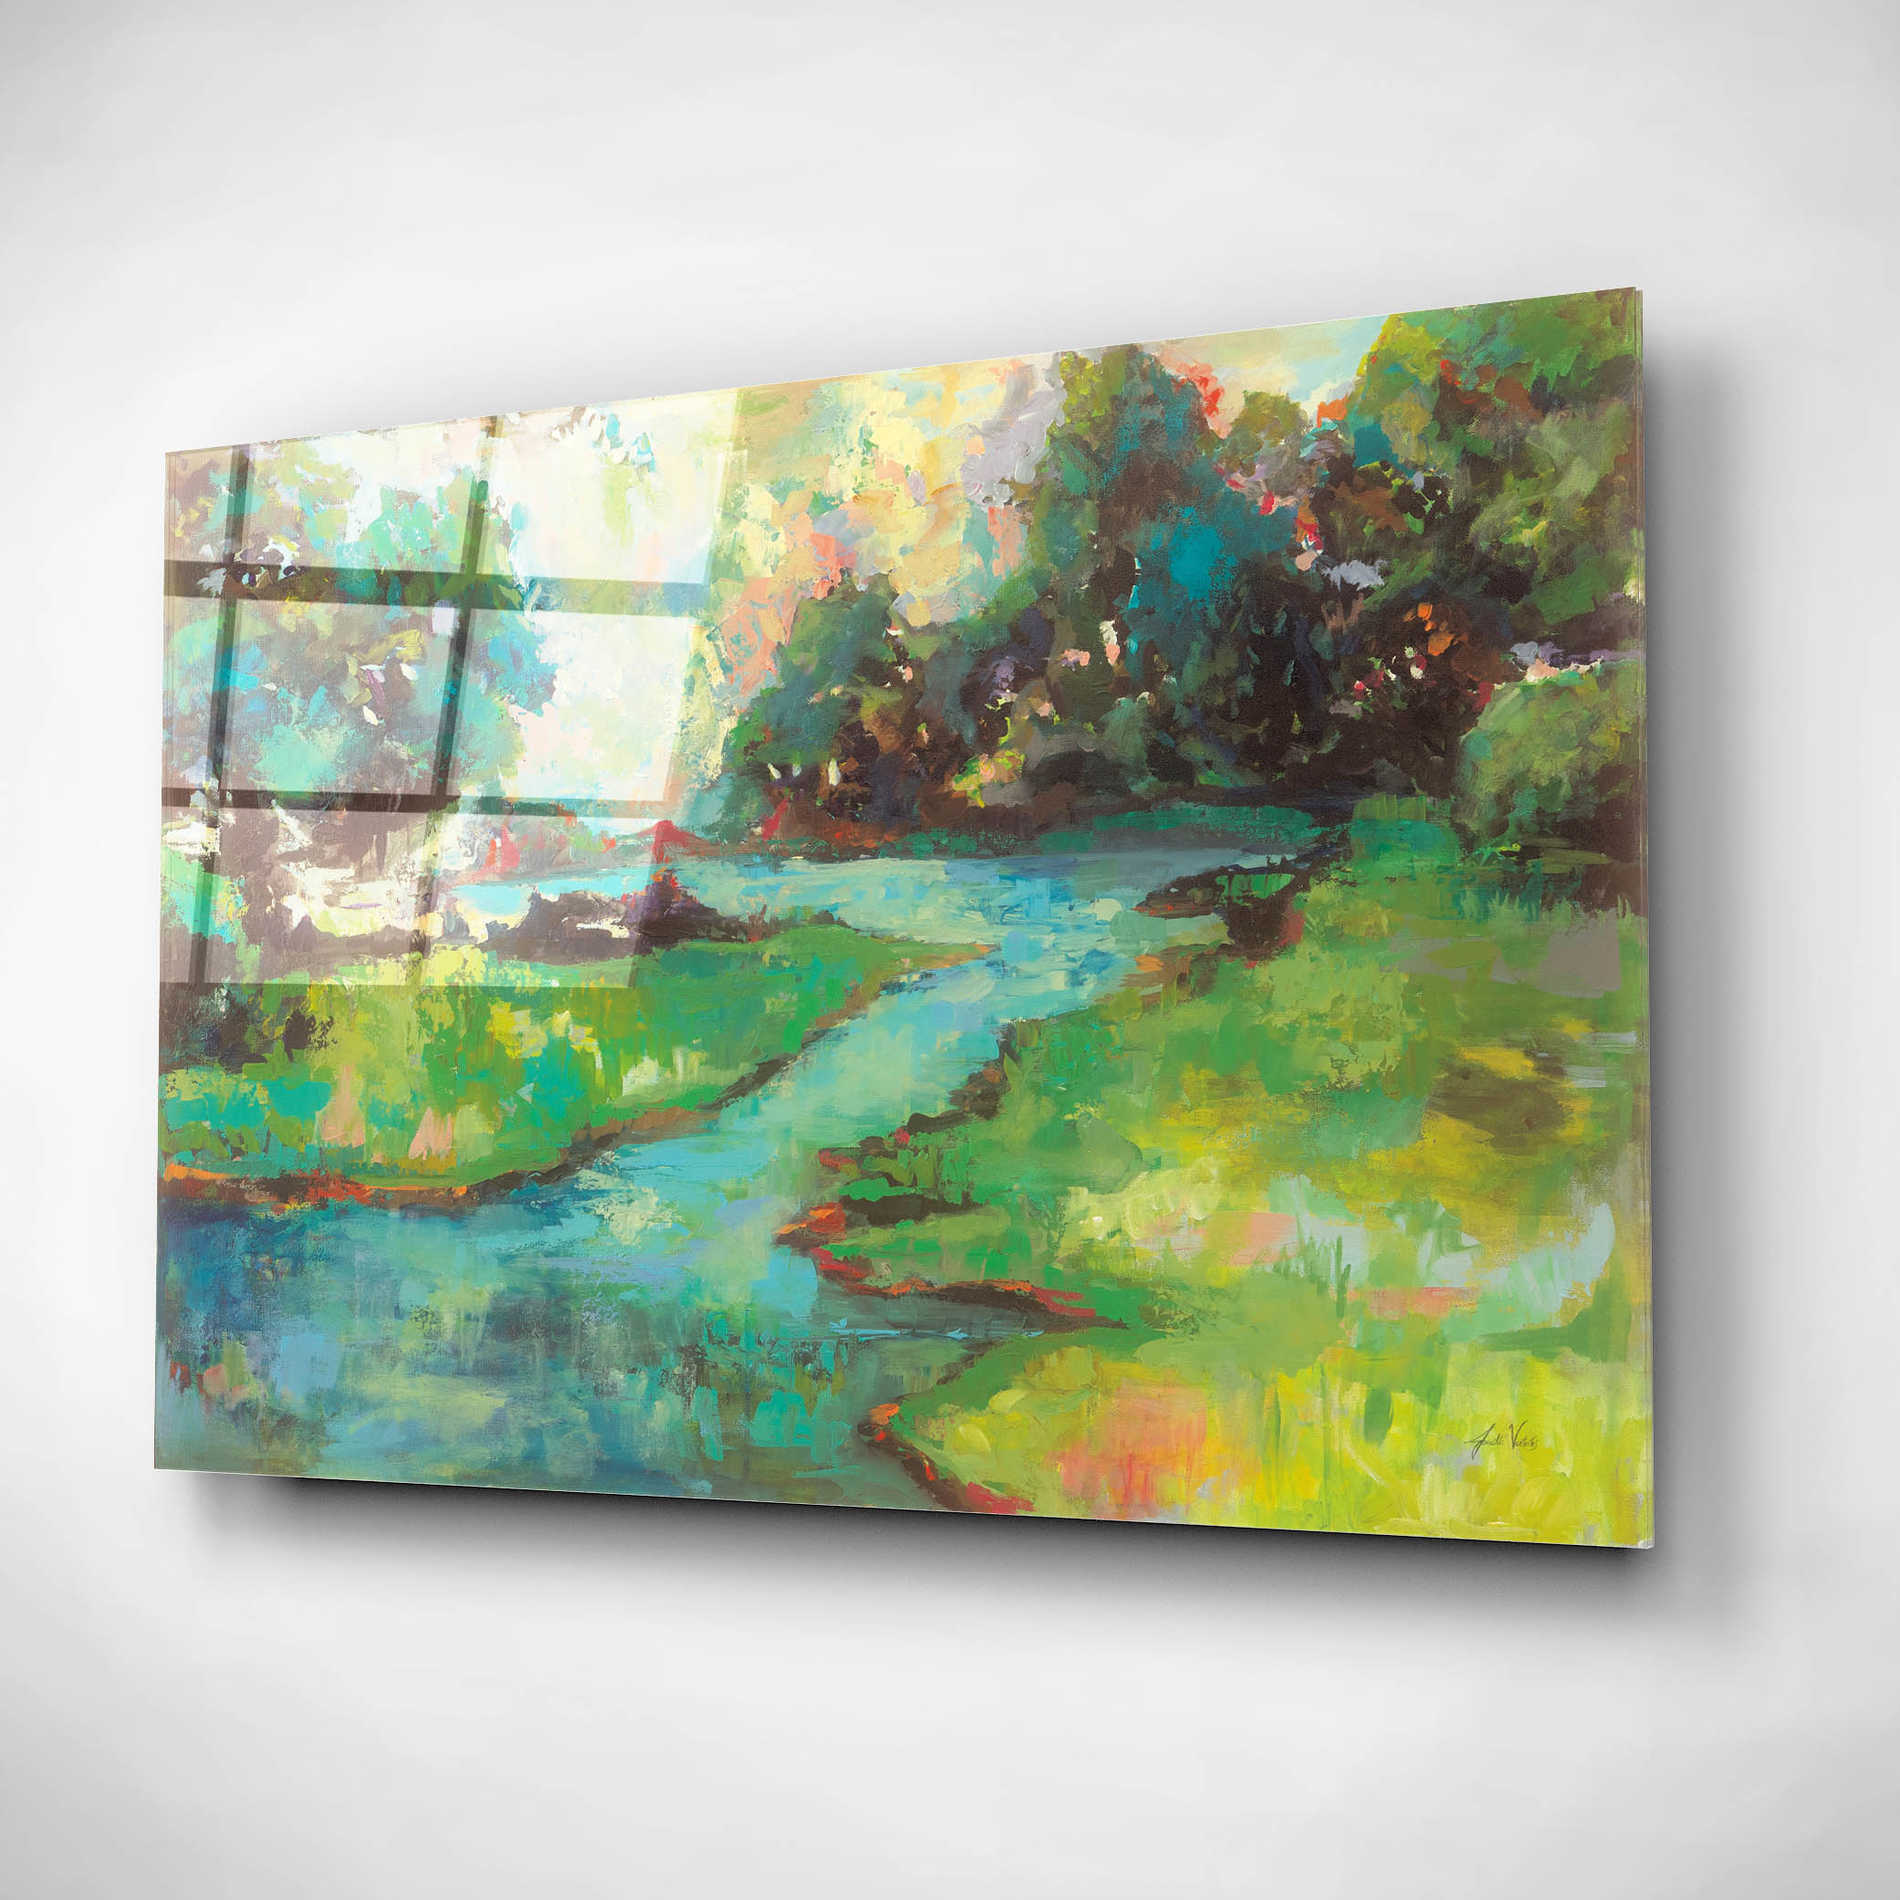 Epic Art 'Landscape in the Park' by Jeanette Vertentes, Acrylic Glass Wall Art,24x16